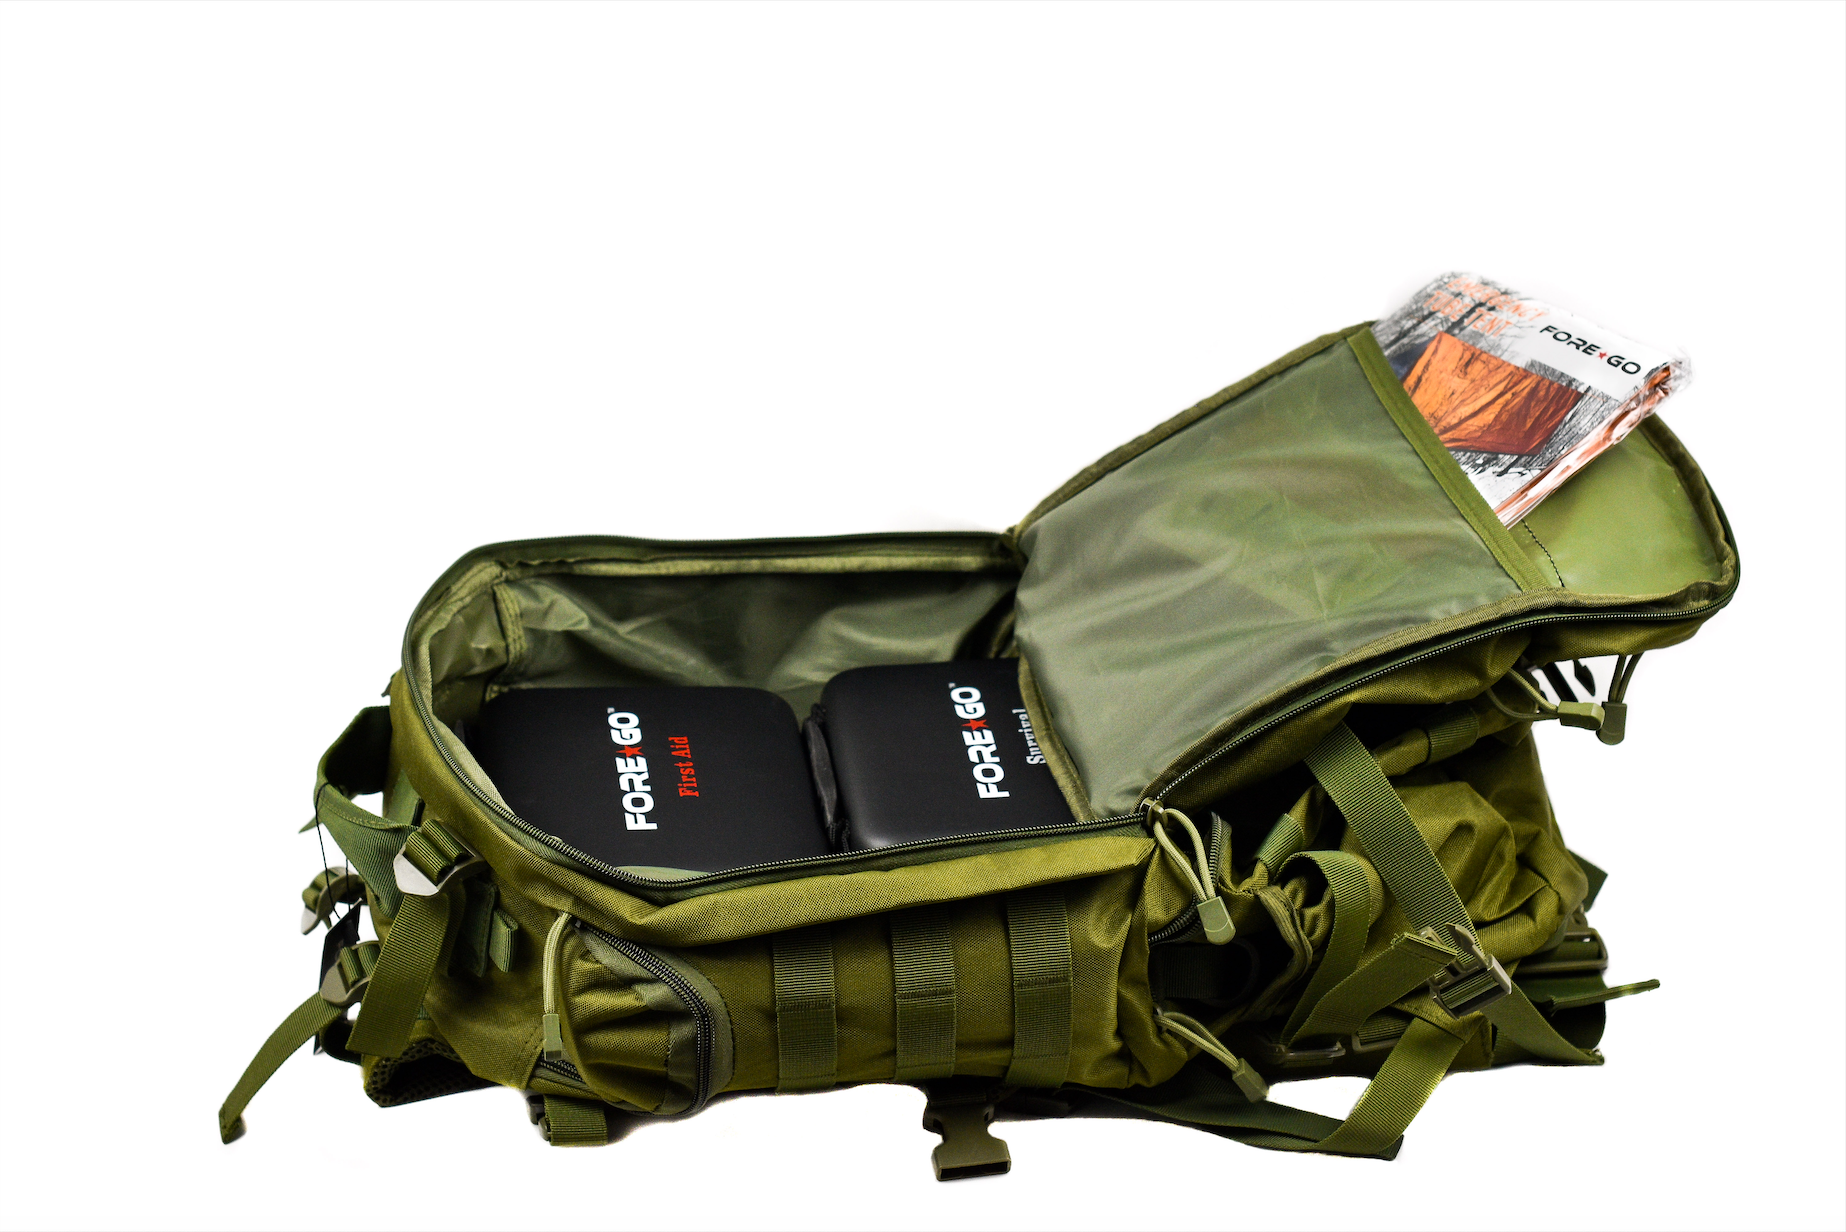 FOREGO Ultimate Adventure & Survival Backpack (Fully Equipped